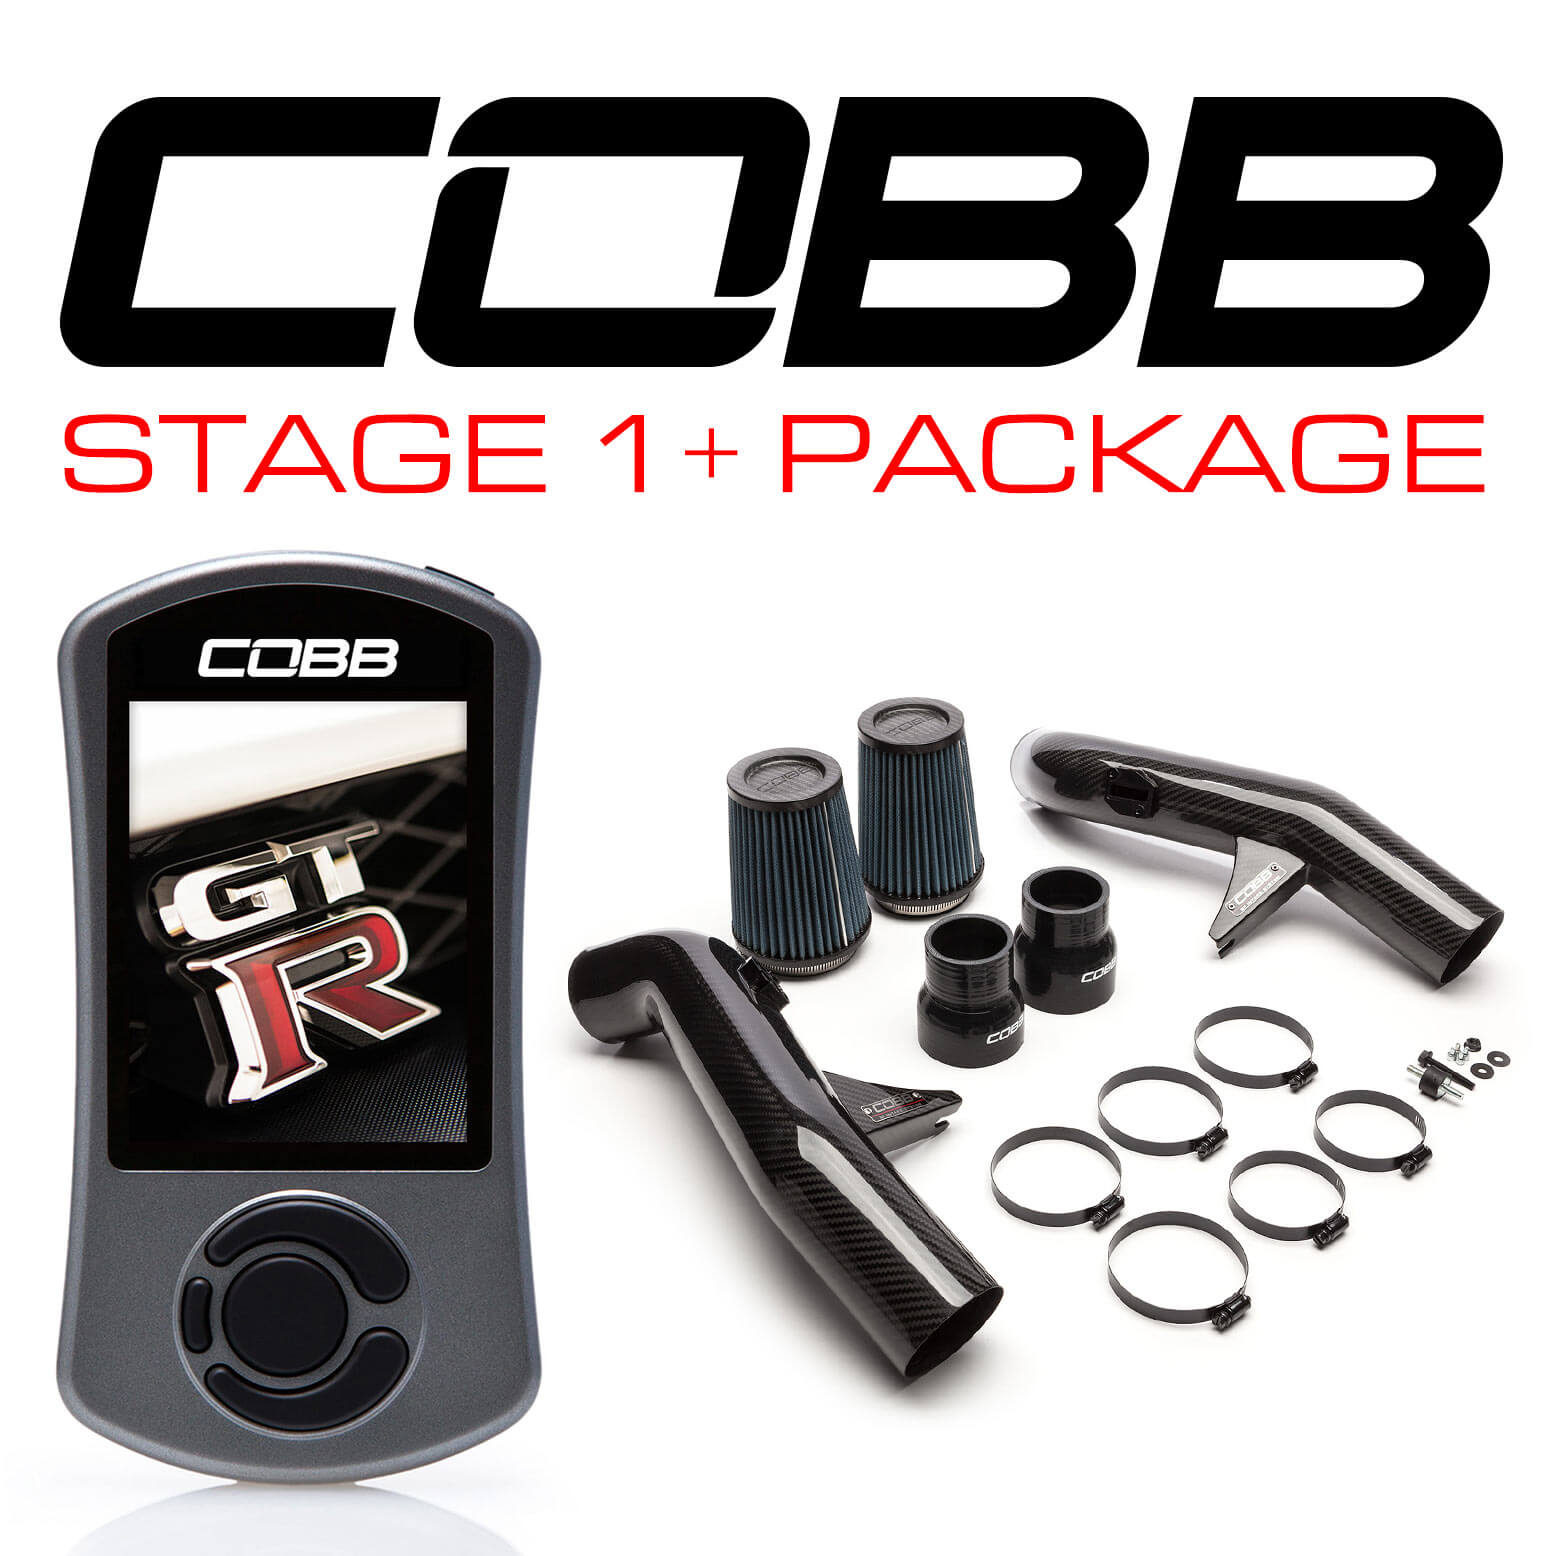 COBB NIS008011PCF NISSAN GT-R Stage 1 + Carbon Fiber Power Package NIS-008 with TCM Flashing Photo-0 